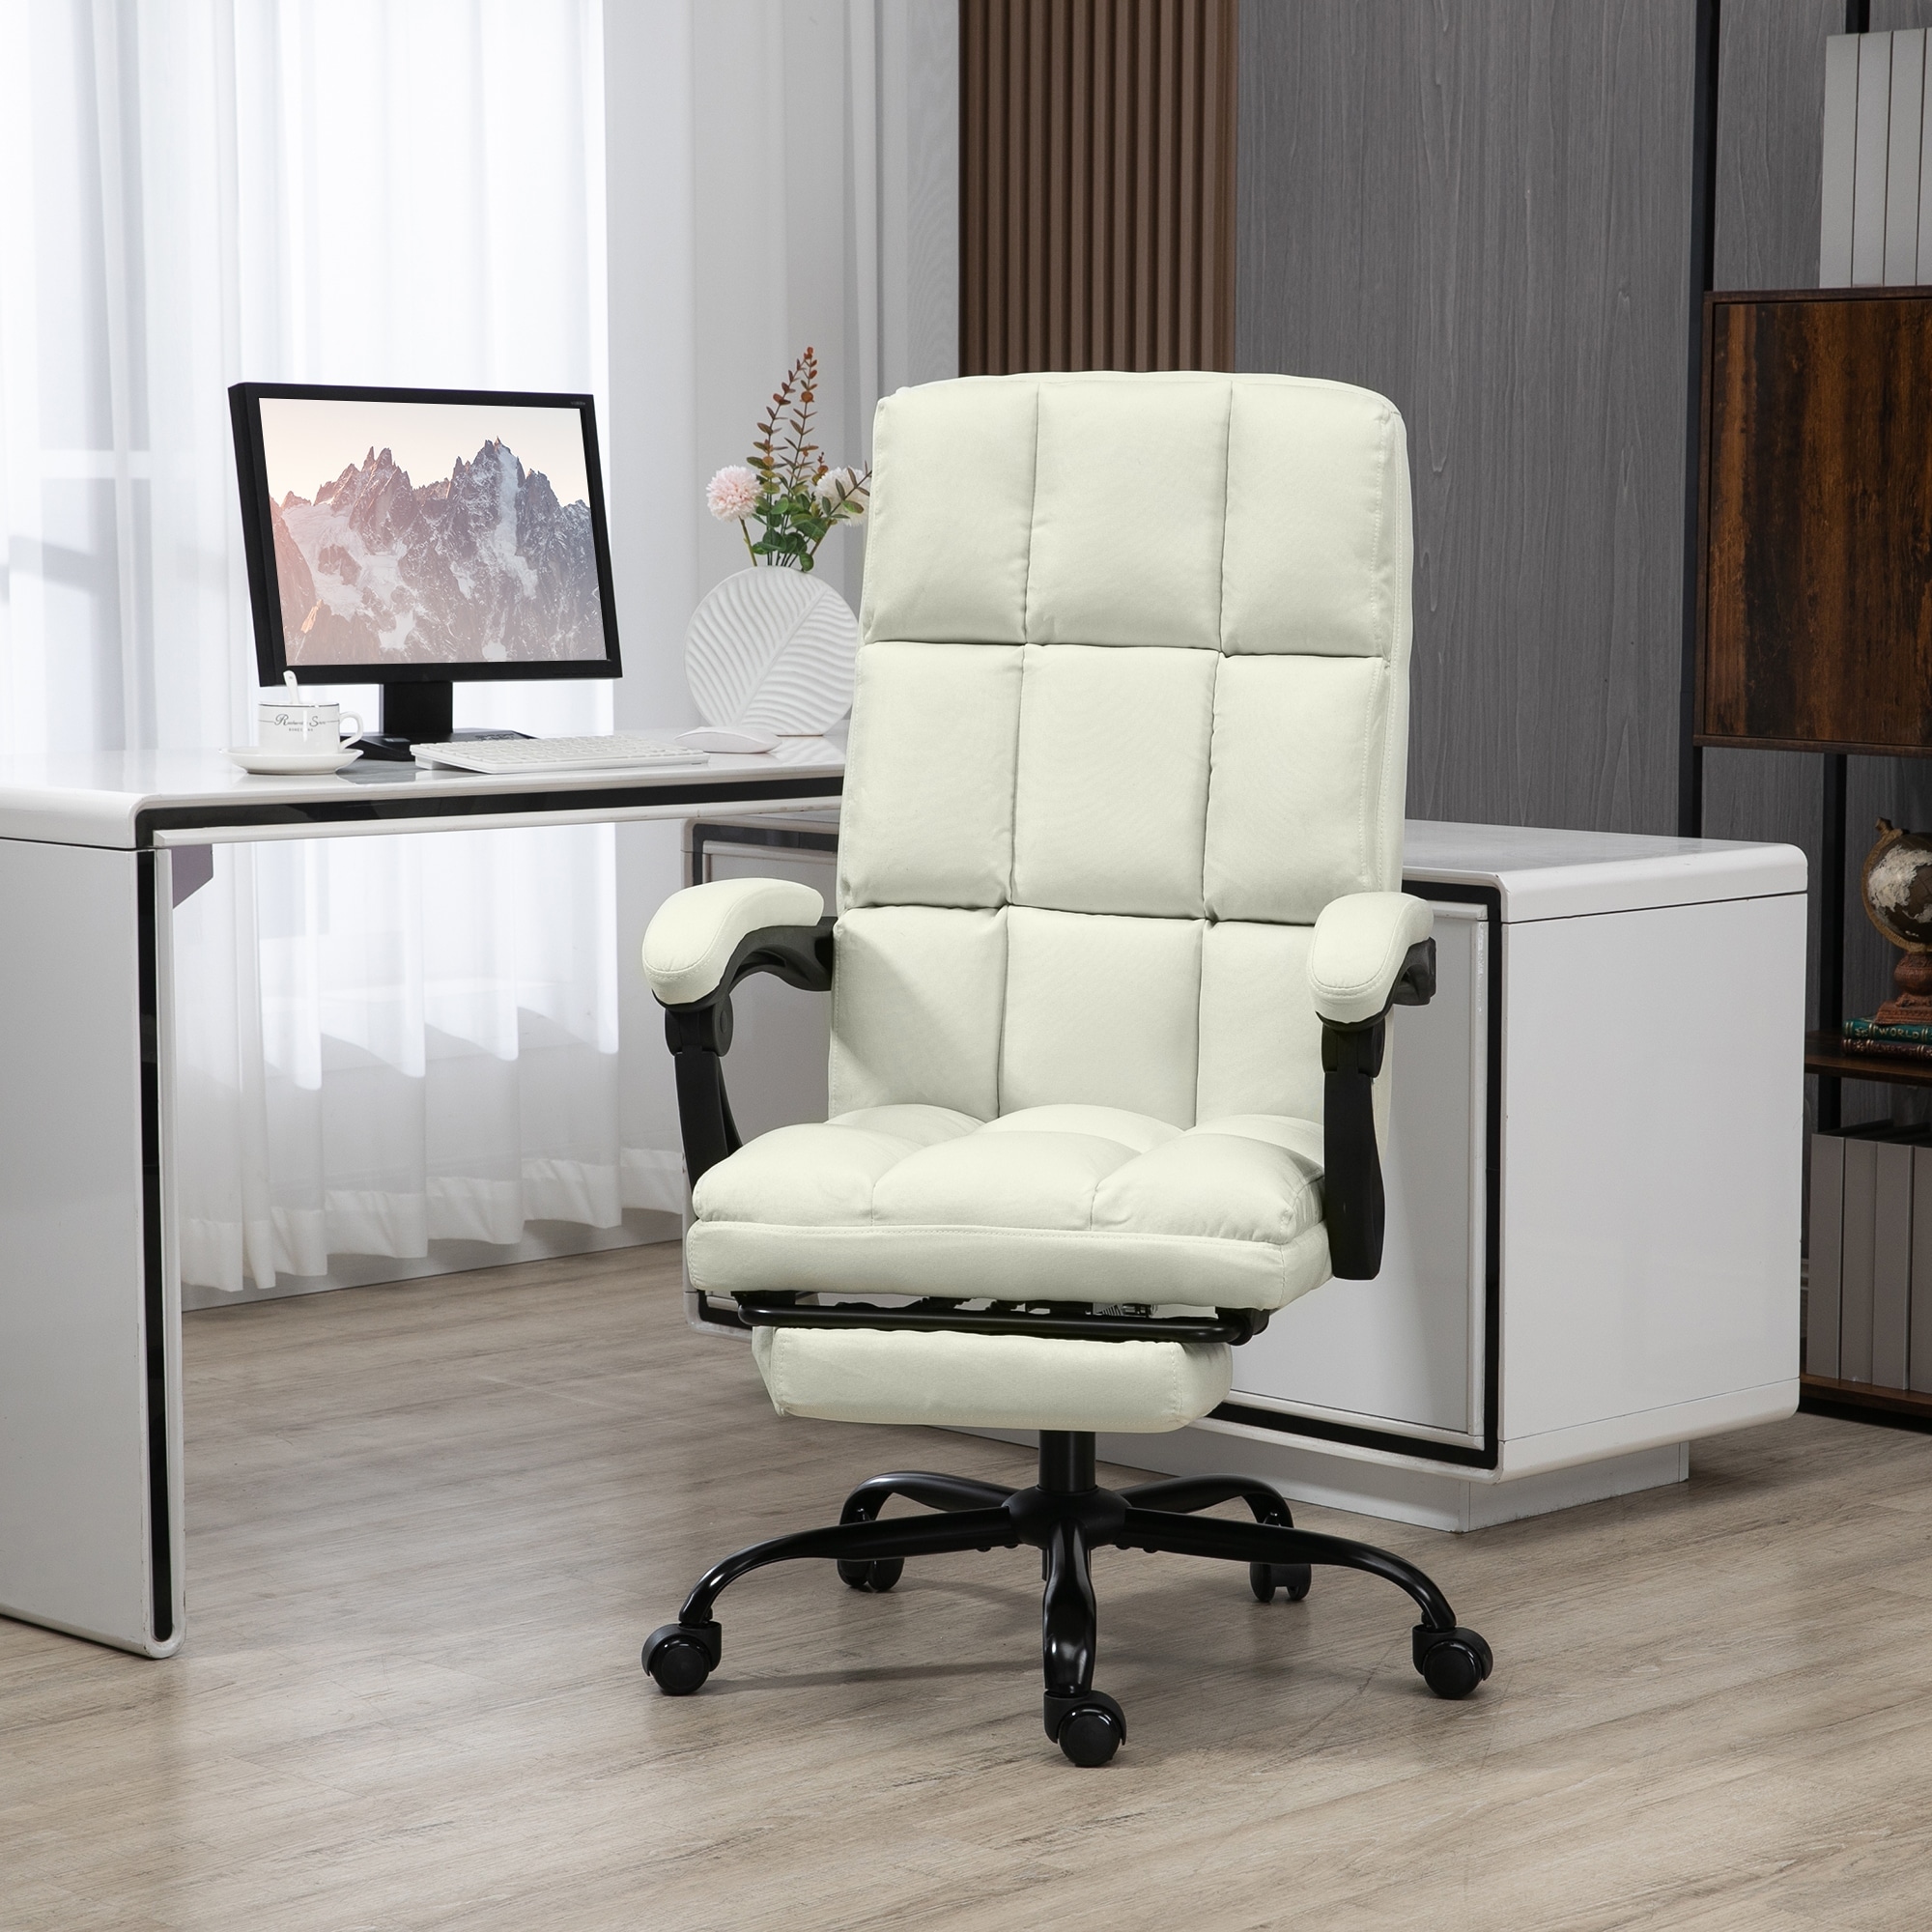 https://ak1.ostkcdn.com/images/products/is/images/direct/bf49db86c6b8caaa7fbf2fde8827cc44e9ddec05/Vinsetto-High-Back-Vibration-Massaging-Office-Chair%2C-Reclining-Office-Chair-with-USB-Port%2C-Remote-Control-and-Footrest.jpg